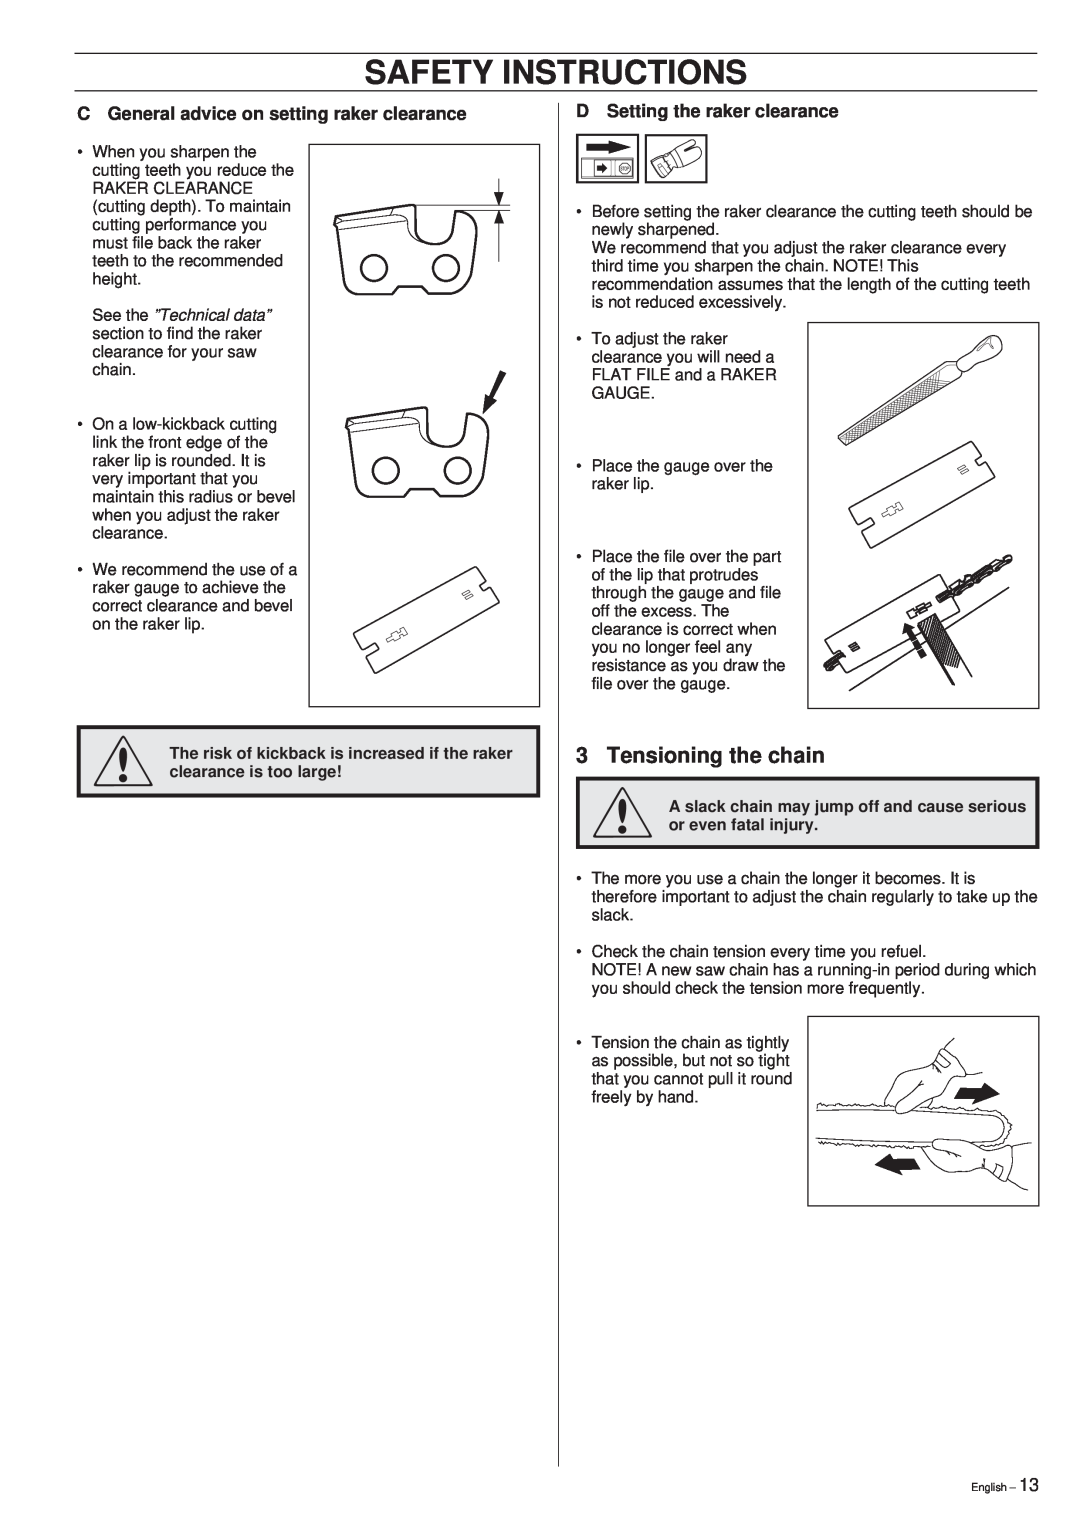 Husqvarna 394XP manual Safety Instructions, 3Tensioning the chain, C General advice on setting raker clearance 